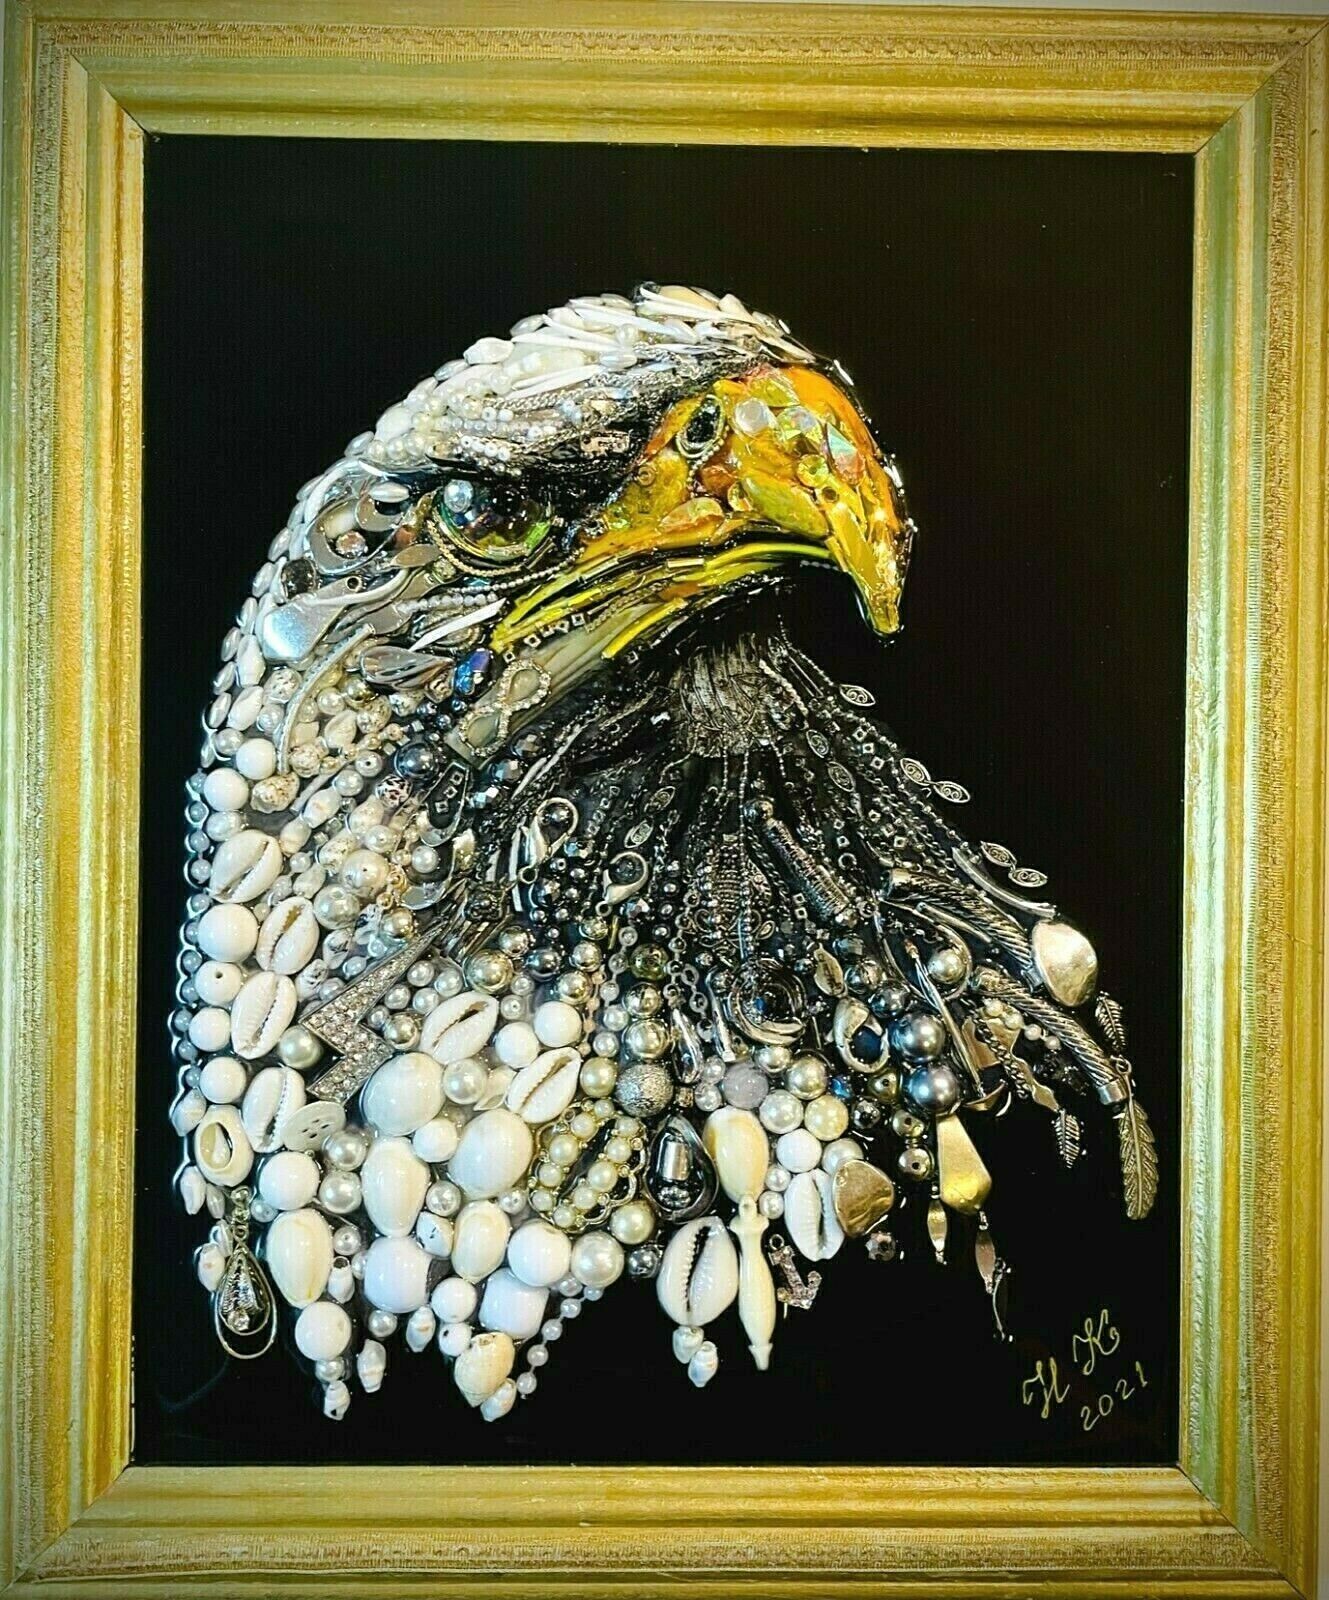 Eagle Portrait, Jewelry Framed One Of A Kind Art, Wall Decor, Unique Gift, Birds